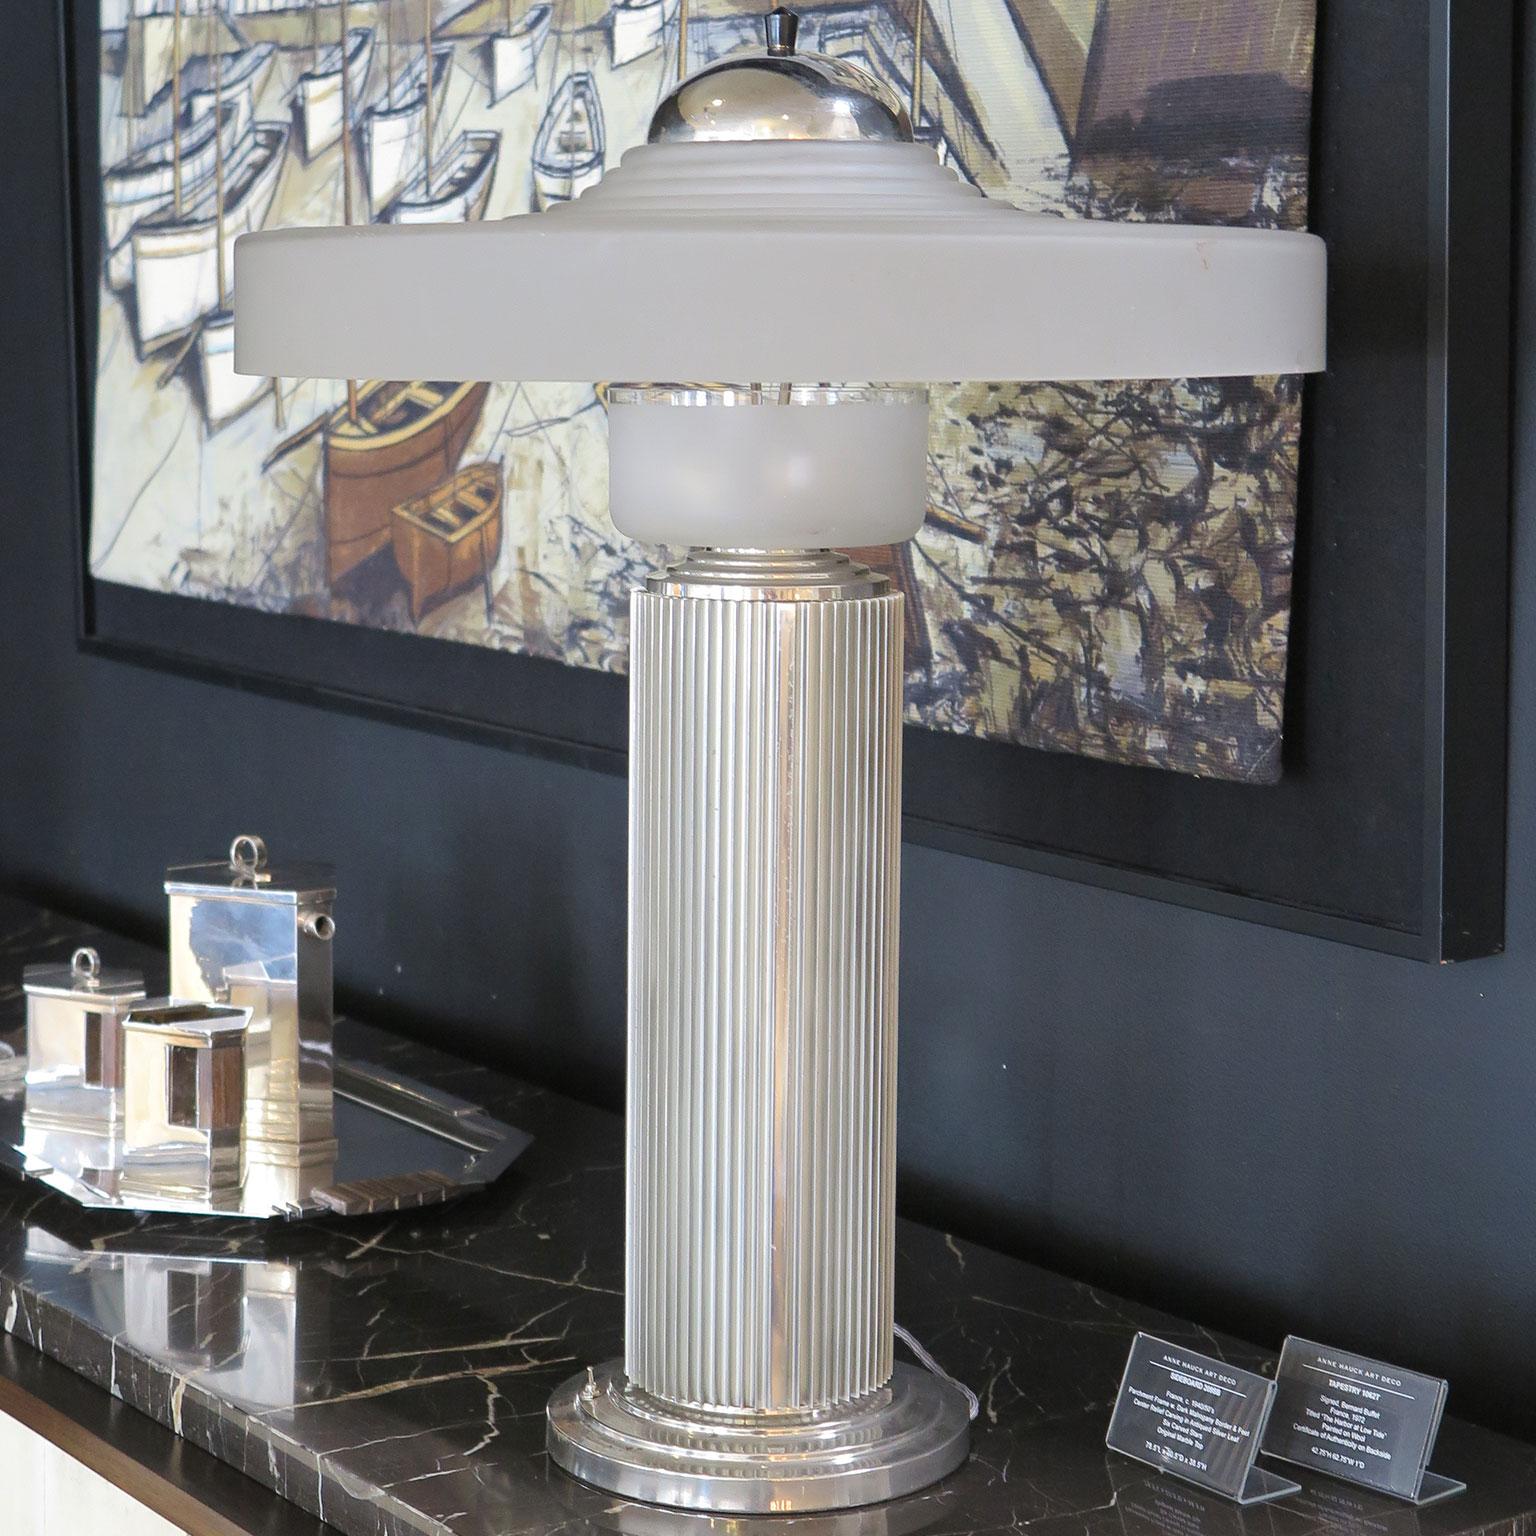 Unique tall table lamp attributed to Georges Leleu in nickel with linear ribbed detailing along the stem. The stepped, frosted glass shade with a nickel hat and finial, sits on top of a frosted glass cup housing the lightbulbs.